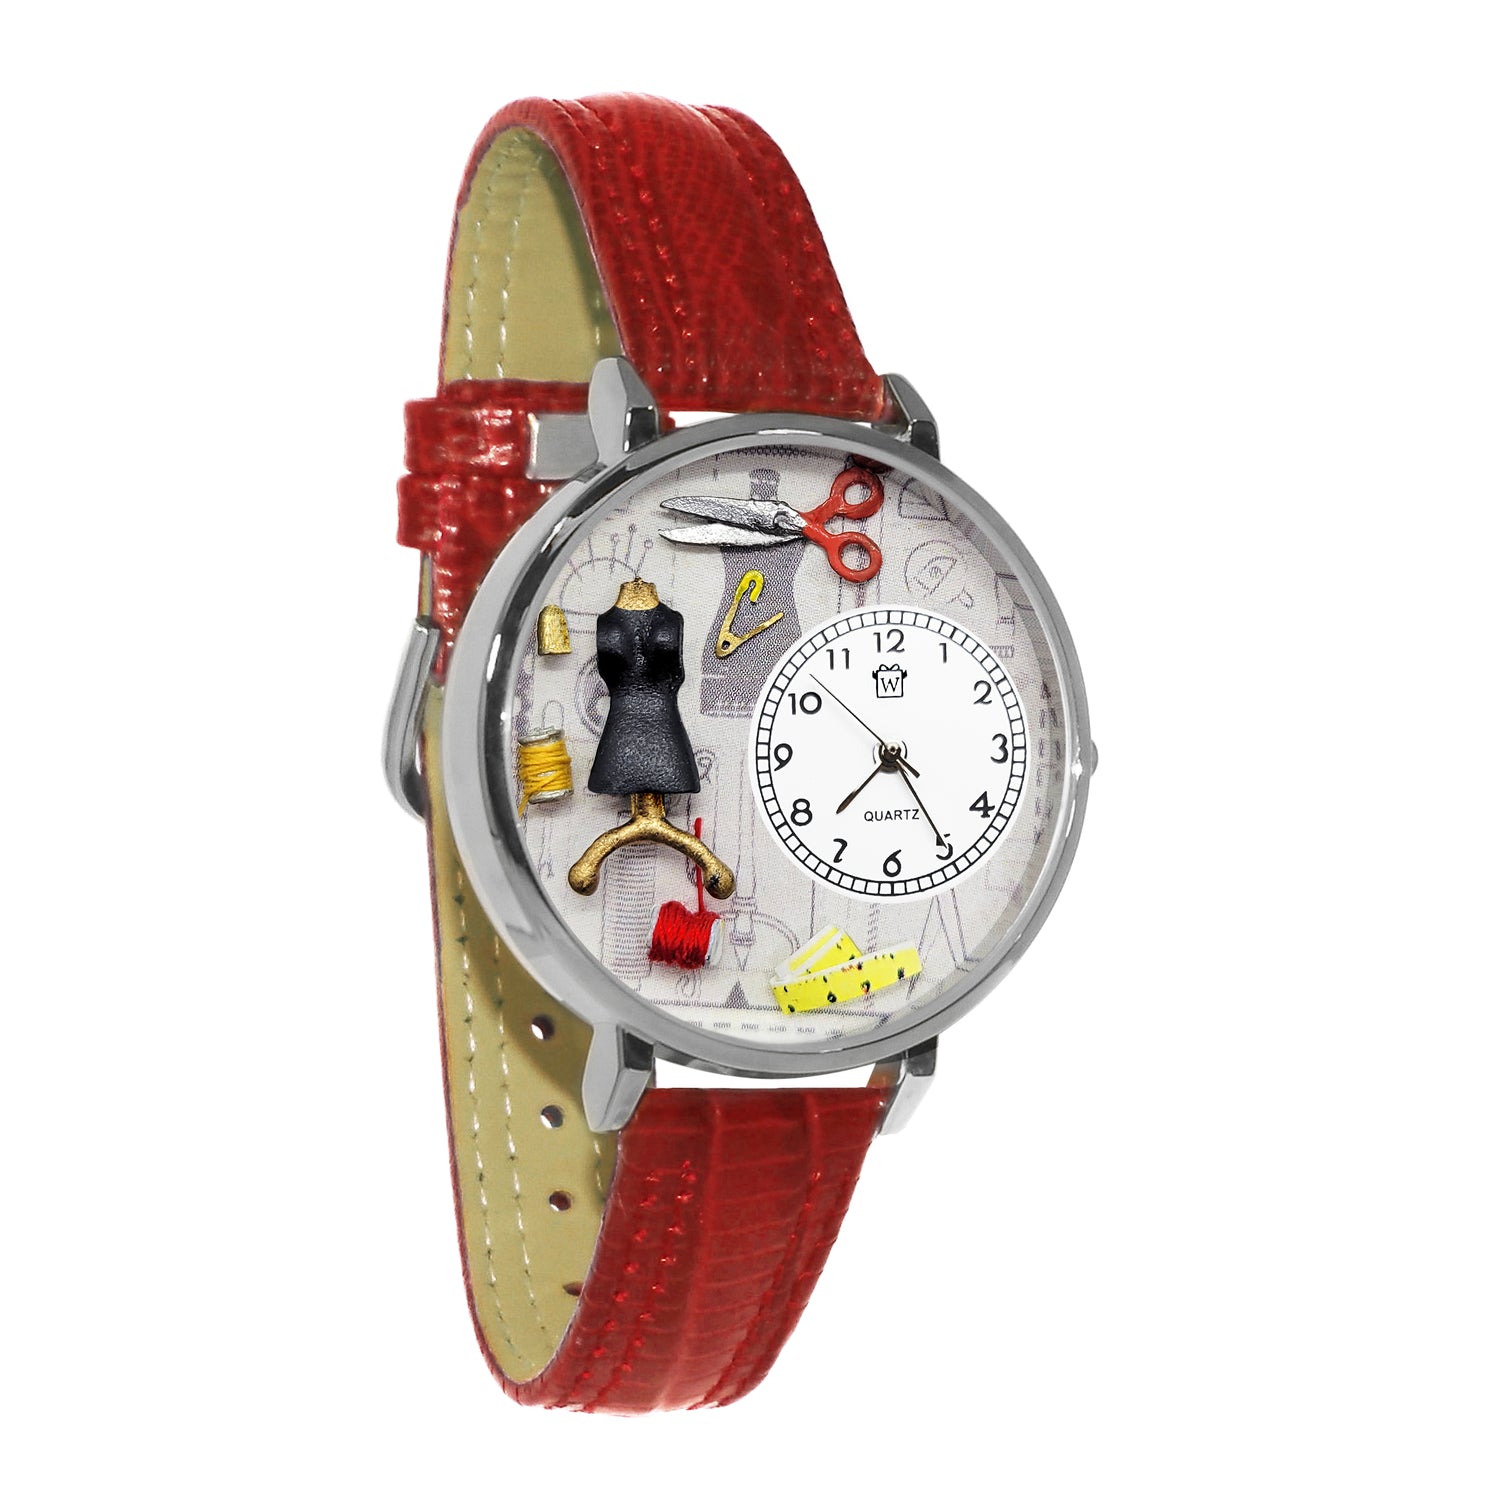 Whimsical Gifts | Fashion Design Sewing 3D Watch Large Style | Handmade in USA | Hobbies & Special Interests | Sewing & Crafting | Novelty Unique Fun Miniatures Gift | Silver Finish Red Leather Watch Band